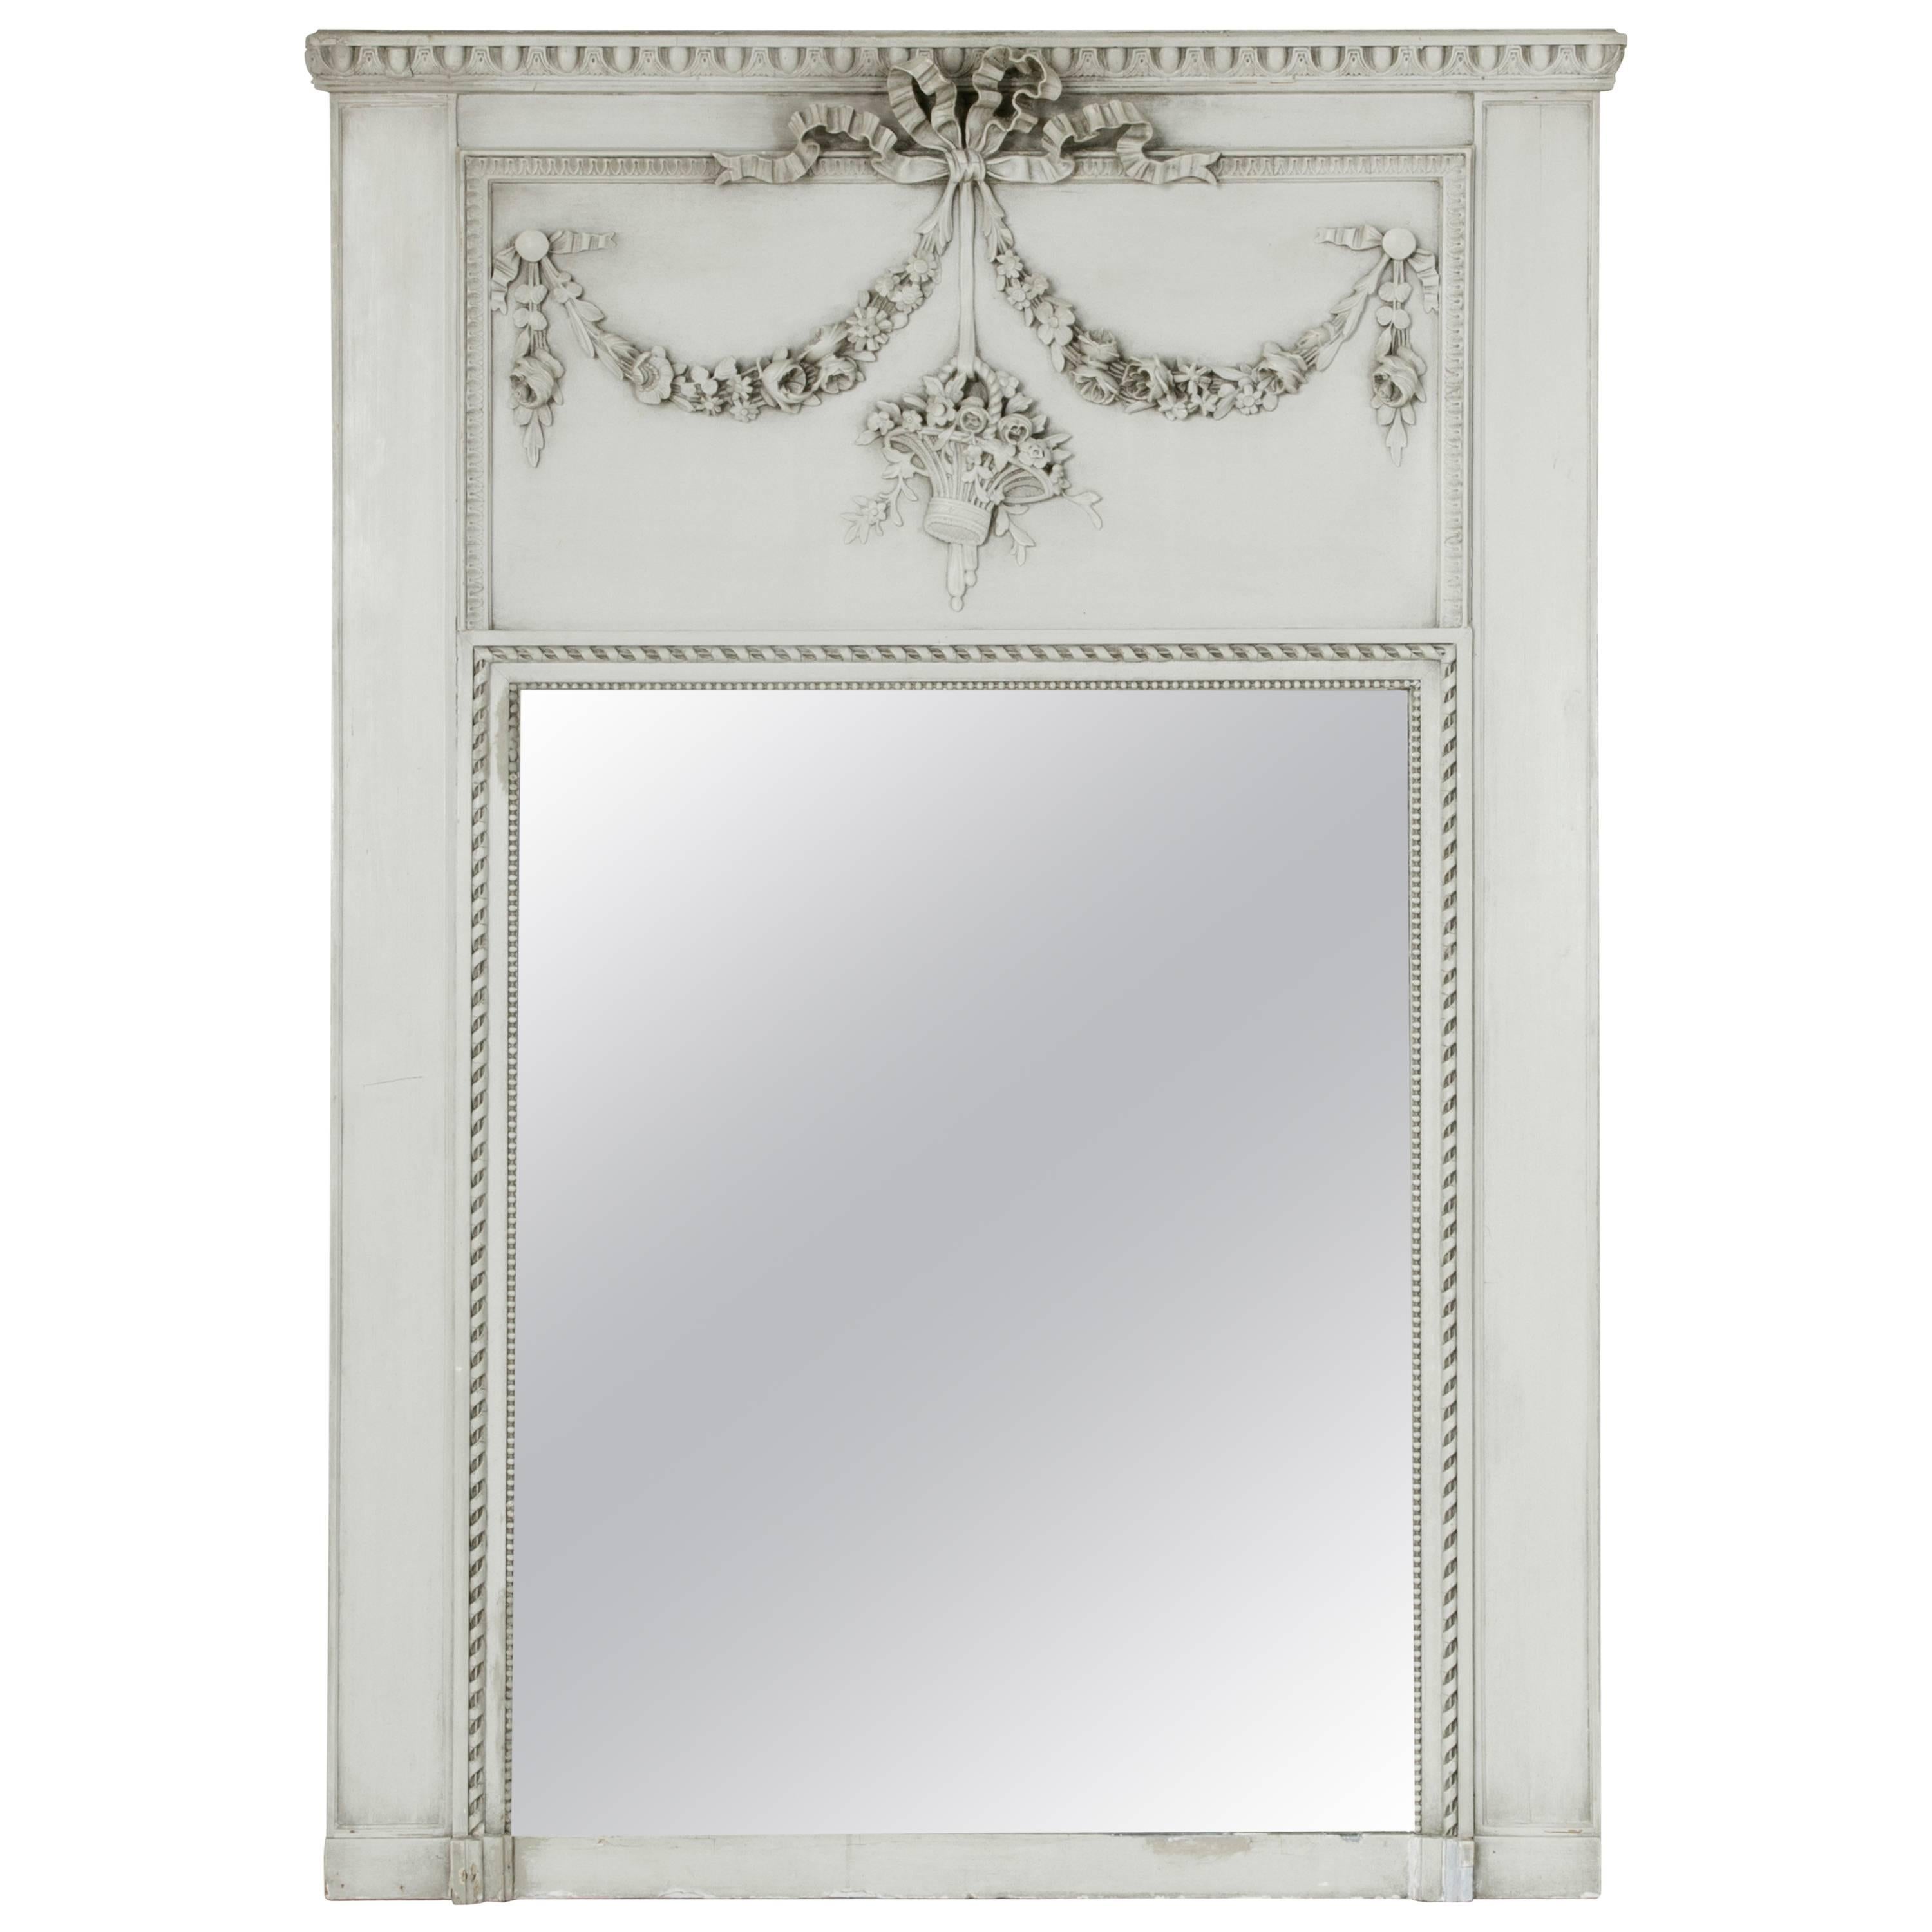 Early 20th Century Large Louis XVI Style Trumeau Mantle Mirror with Basket Motif